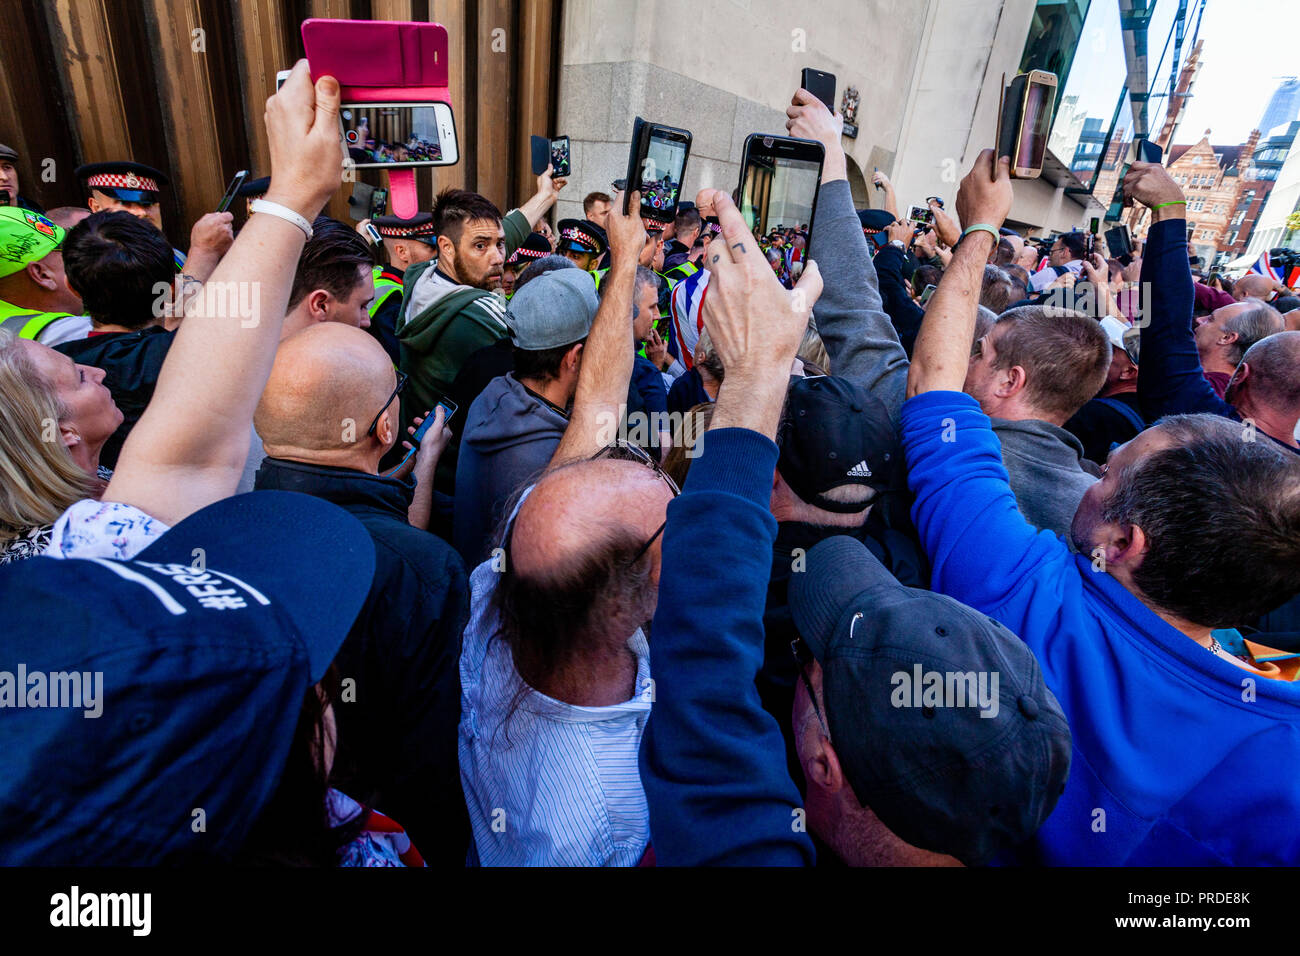 Supporters Of The Right Wing Activist Tommy Robinson Film Him With Their Mobile Phones Leaving 'The Old Bailey' Court, London, UK Stock Photo